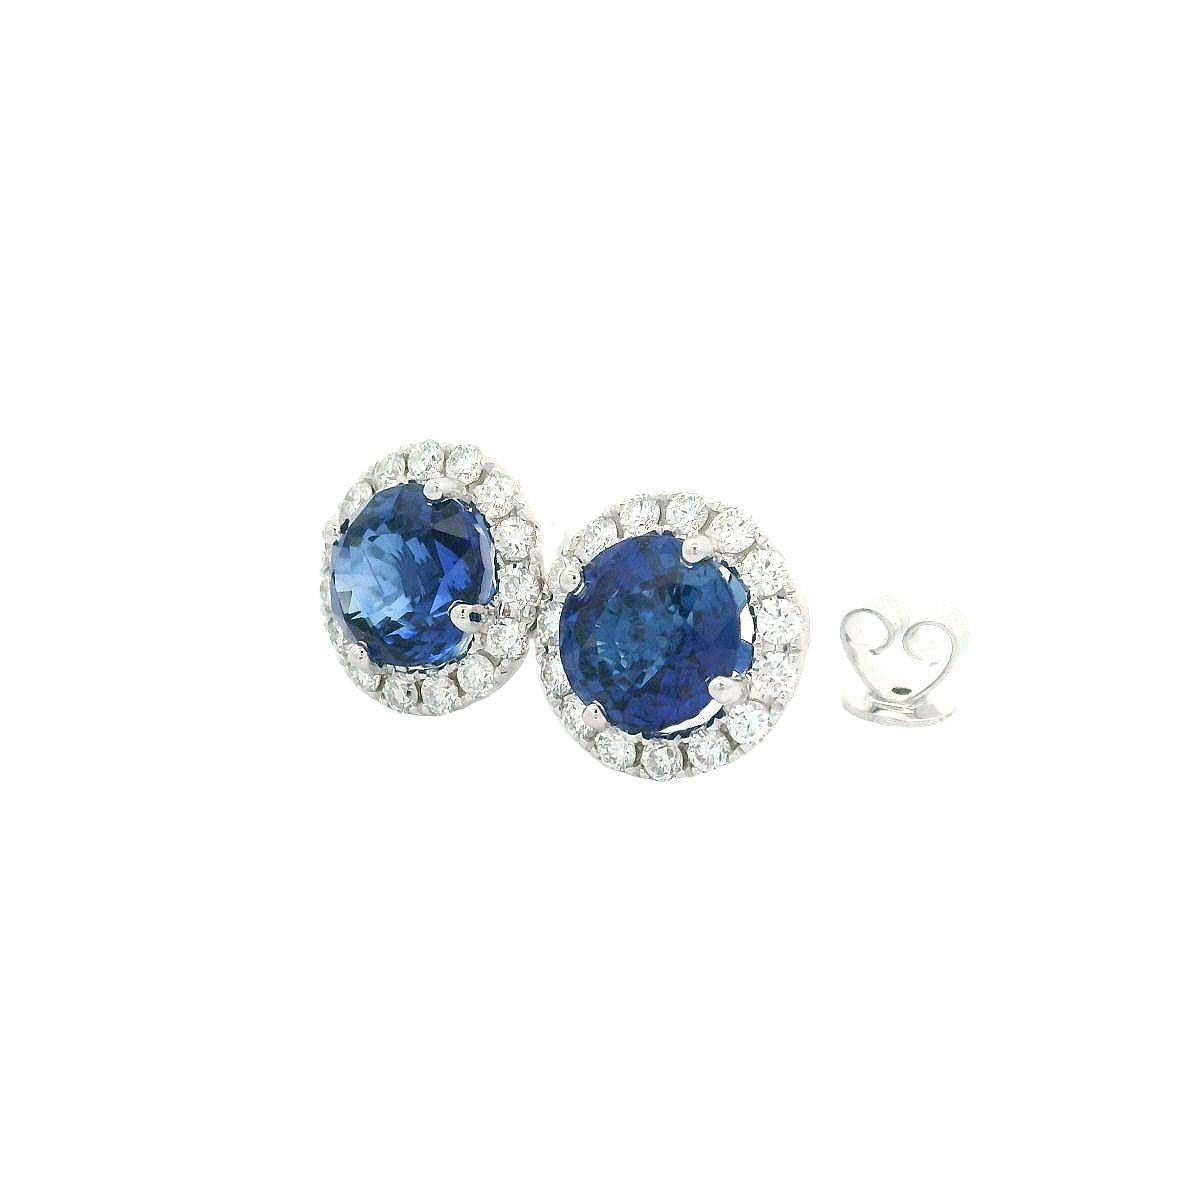 NEW 18k Gold 5.78ctw GIA Round Vivid Blue Sapphire & Diamond Halo Stud Earrings For Sale 3